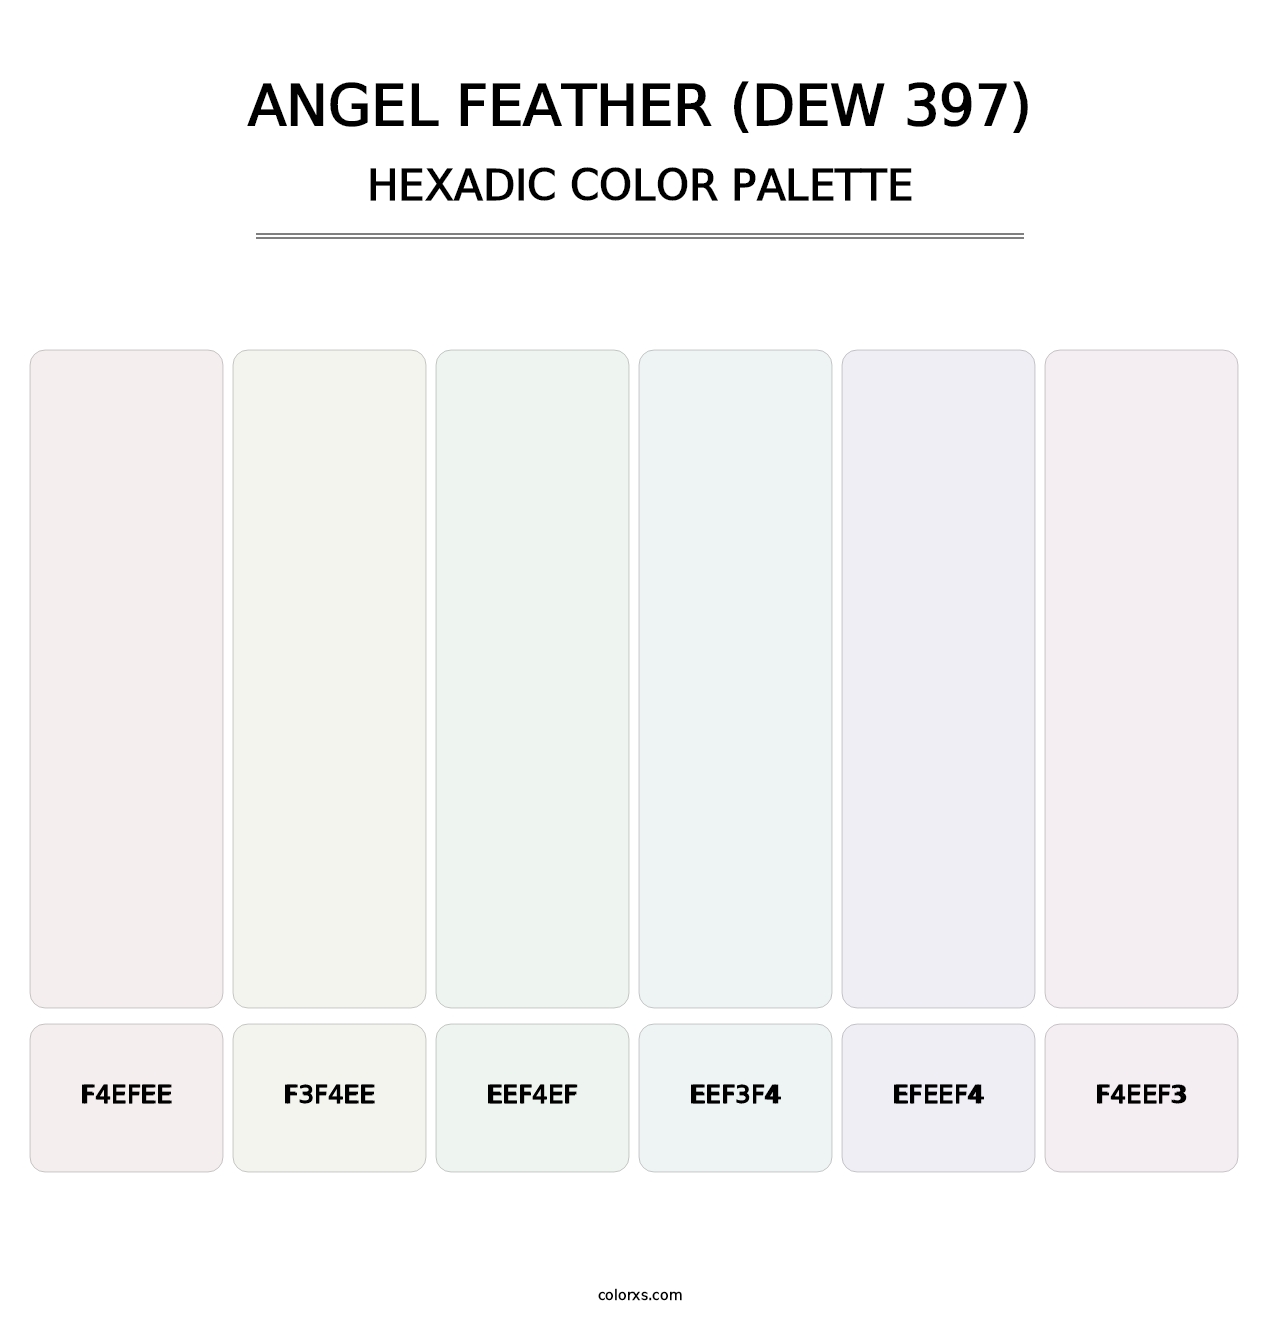 Angel Feather (DEW 397) - Hexadic Color Palette